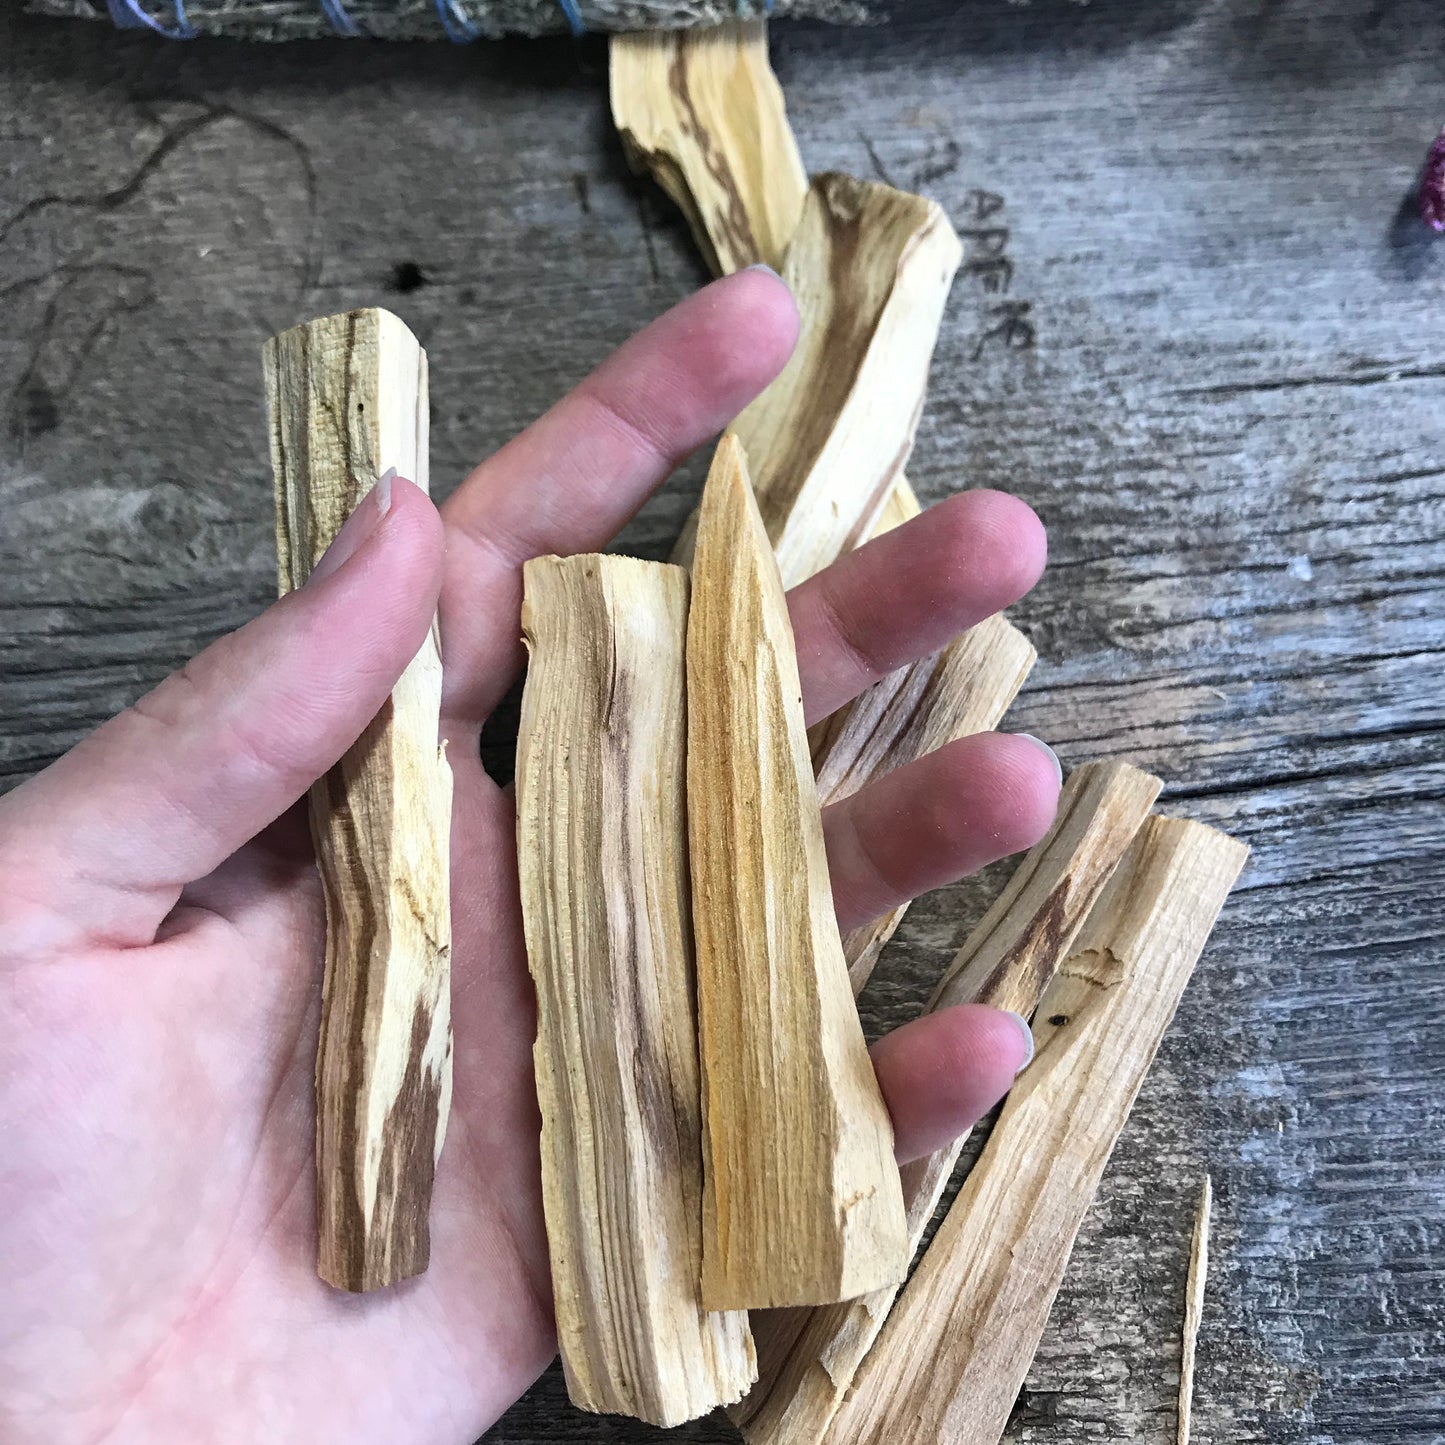 Large Palo Santo Wood Stick, Wood, ( Approx 4" long) Aromatic Wood for Meditation and Smudging 1638